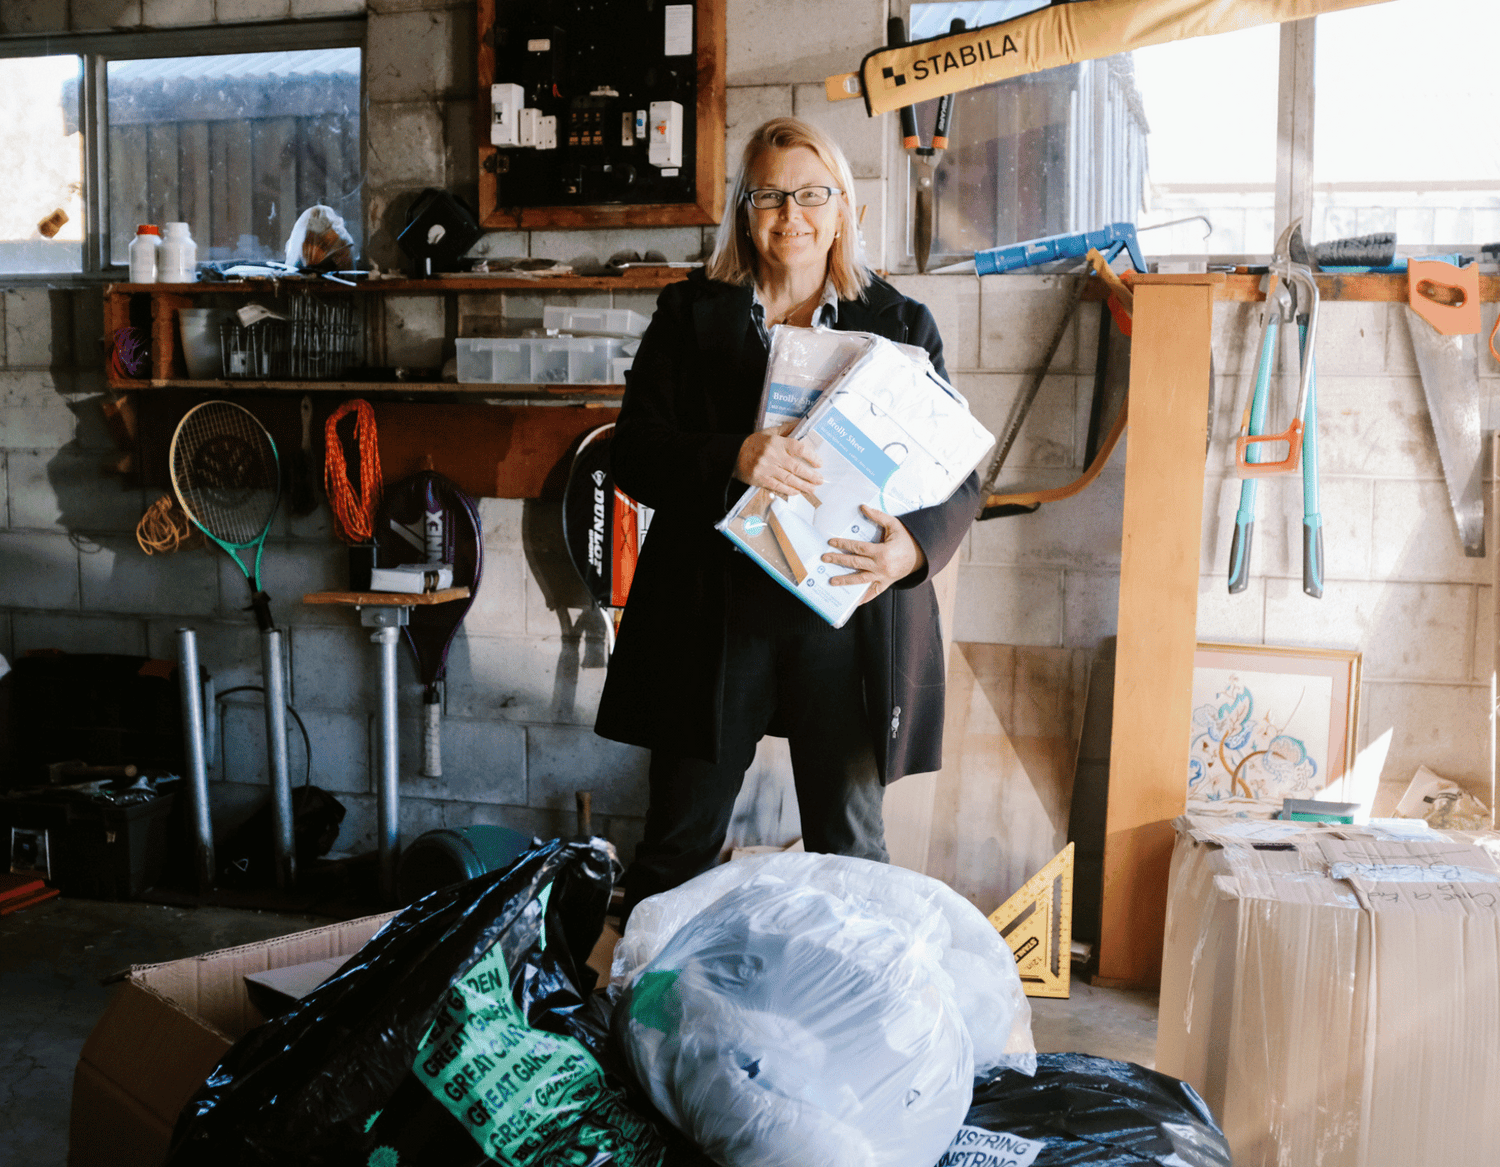 Early photo of Diane in garage sorting through delivery of various materials in black rubbish sacks, while holding 2 packaged Brolly Sheets.